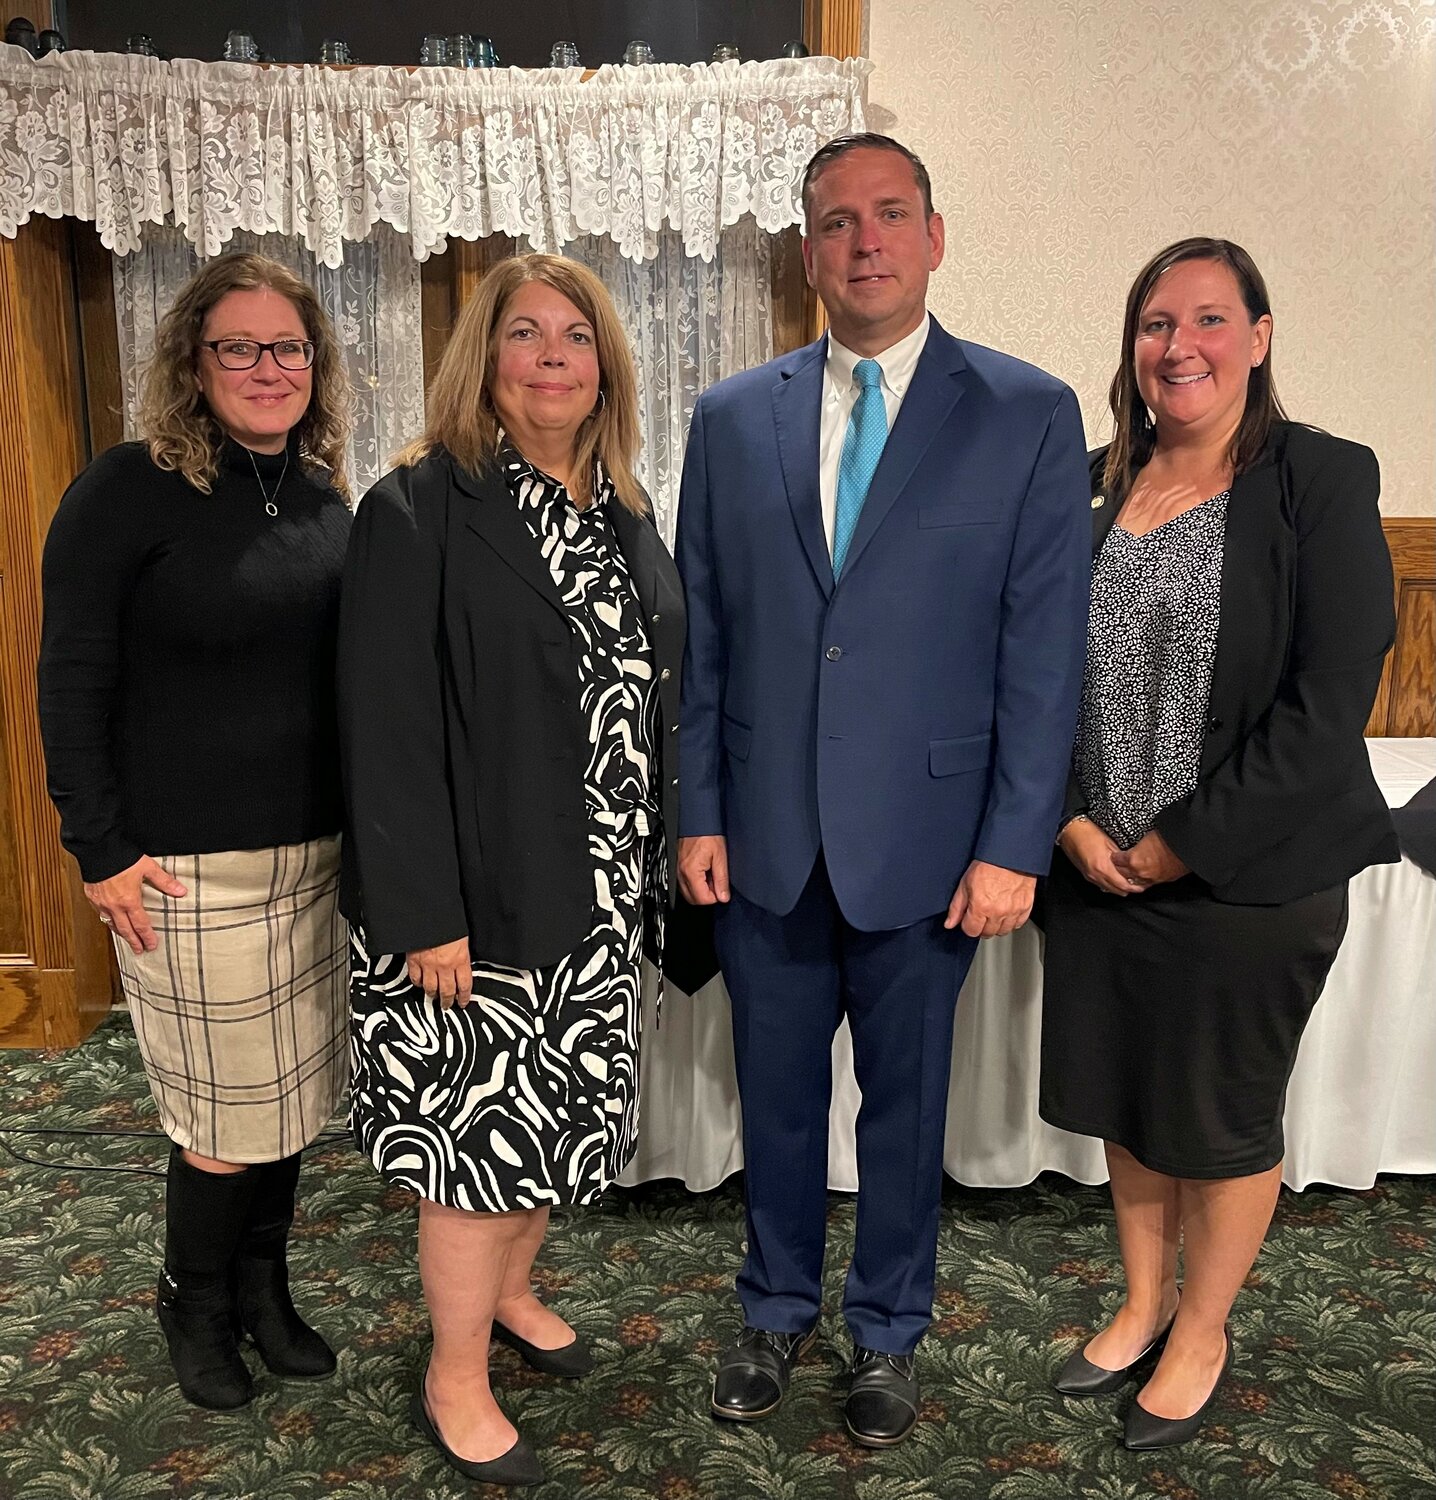 Orange County Executive Steven M. Neuhaus delivers his budget address on Tuesday, September 26th at the Orange County Association of Towns, Villages and Cities meeting at the Erie Hotel and Restaurant in Port Jervis; (from left to right) Orange County Deputy Budget Director Gretchen Riordan, Budget Director Deb Slesinski, Neuhaus and Commissioner of Finance Kerry Gallagher on Tuesday night.